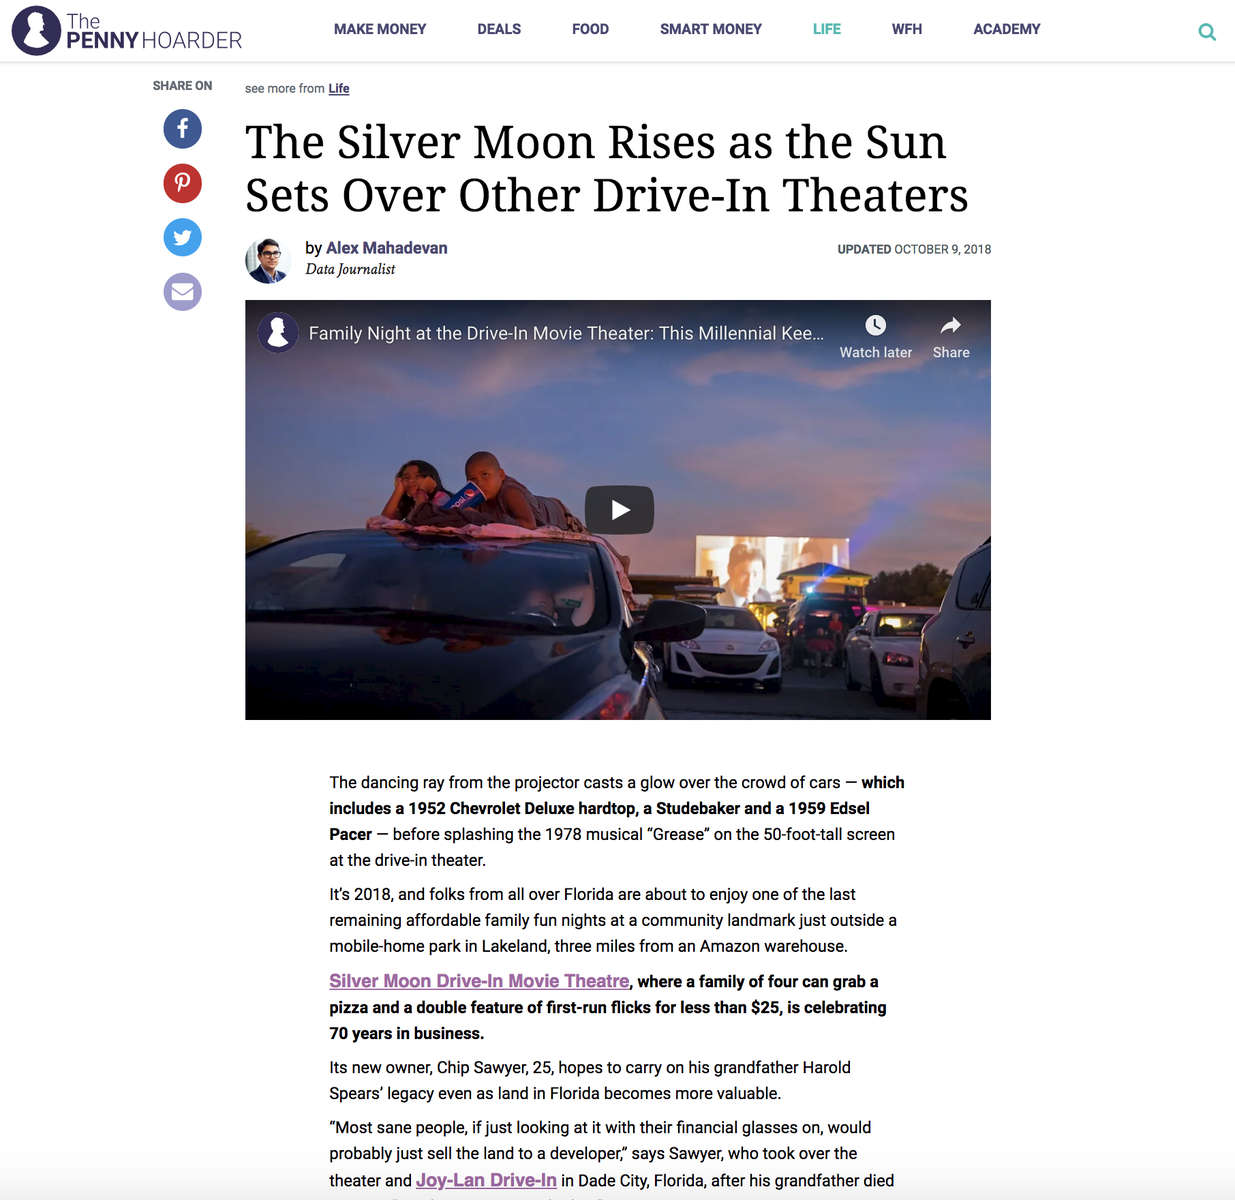 https://www.thepennyhoarder.com/life/silver-moon-drive-in-movie-theater/?s=silver+moon+drive+in&aff_sub2=&aff_id=2